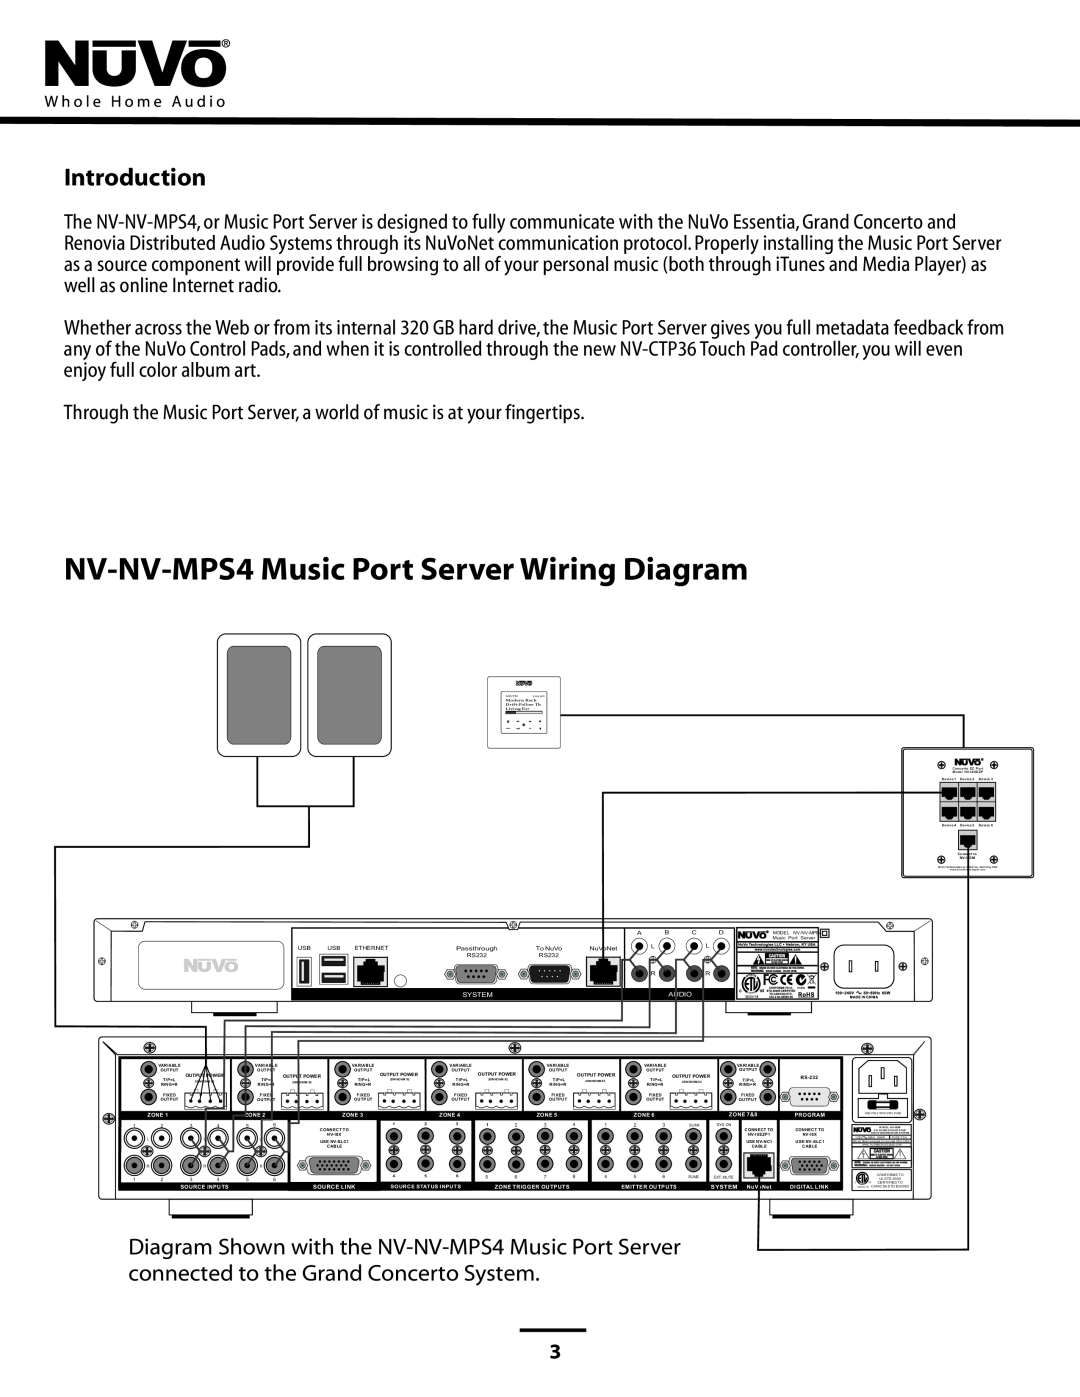 Nuvo NV-NV-MPS4 Music Port Server Wiring Diagram, Introduction, Diagram Shown with the NV-NV-MPS4 Music Port Server 